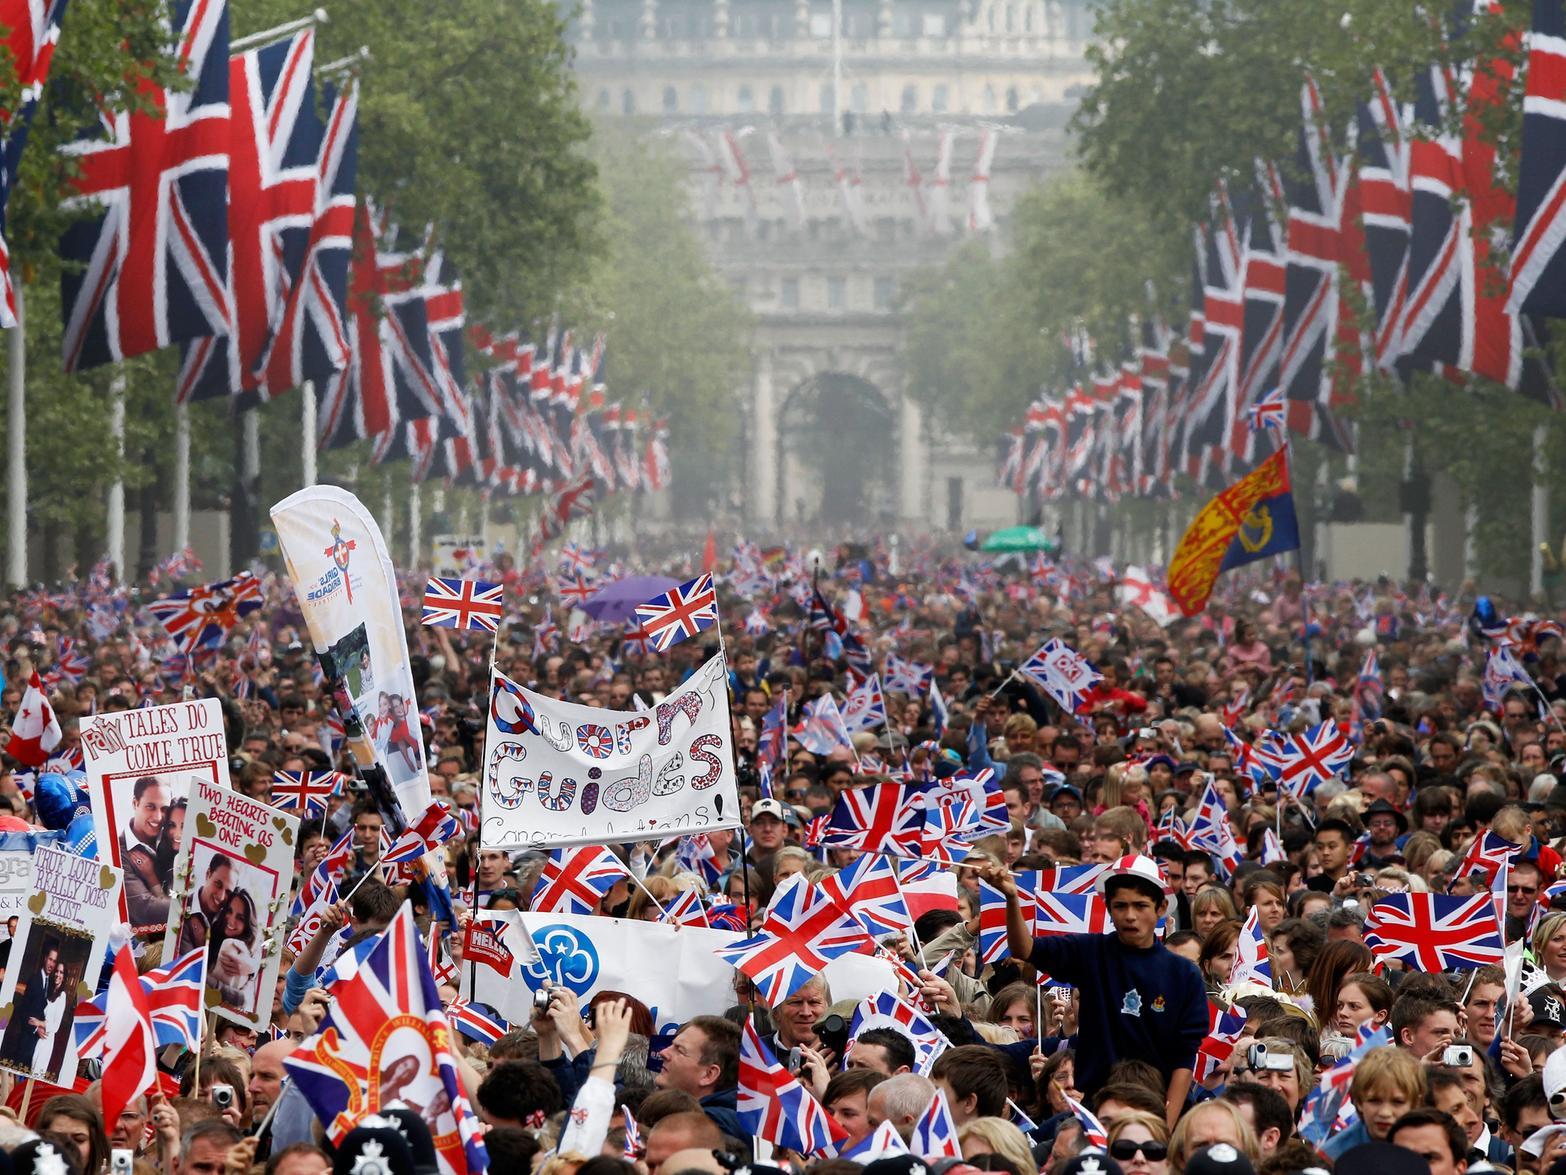 Union flags were fluttering and streets across the country were closed off for community parties as Prince William tied the knot with Kate Middleton at Westminster Abbey.